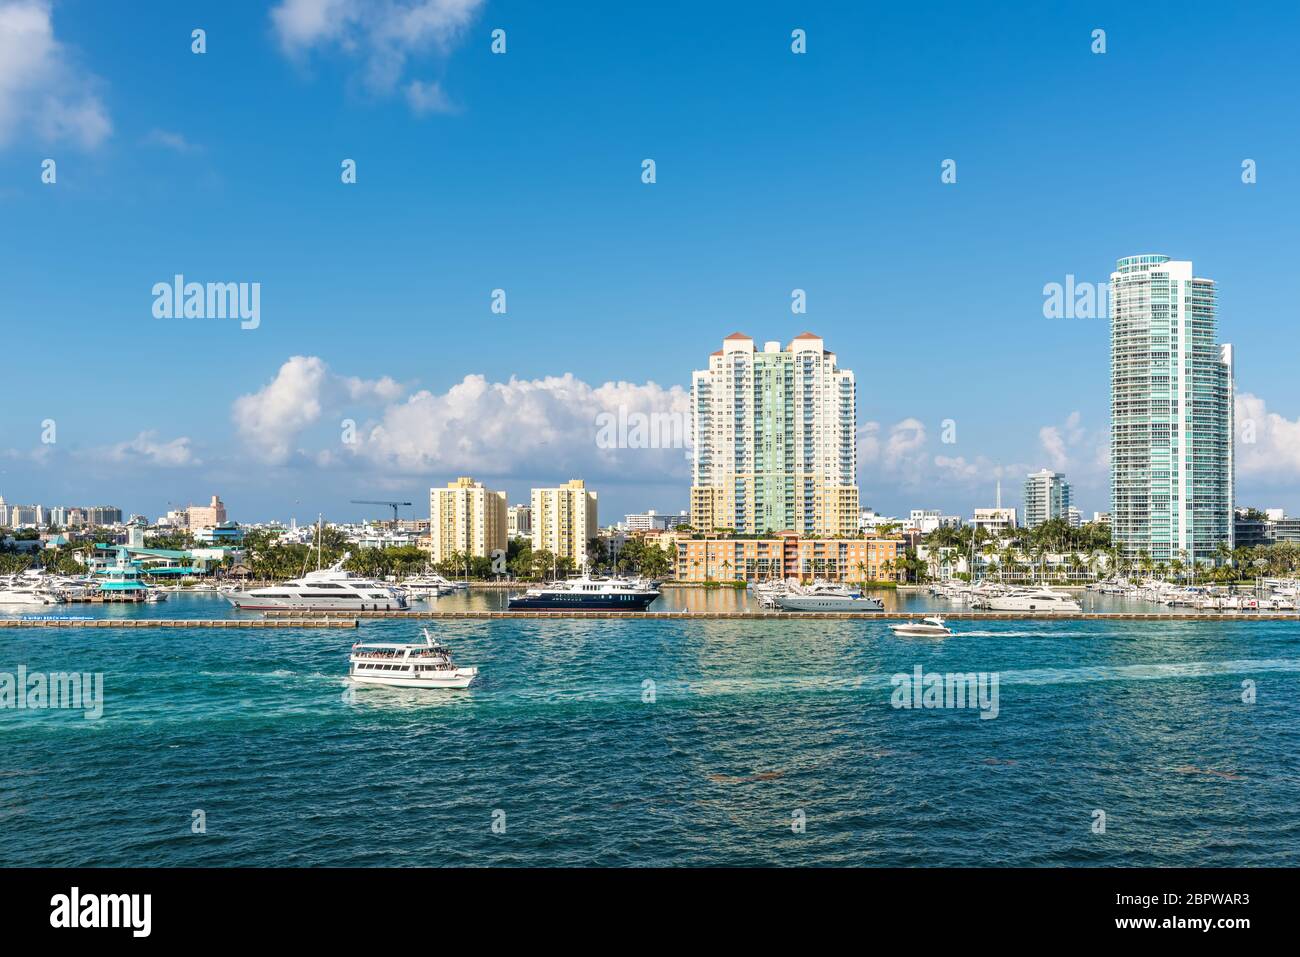 Miami, FL, United States - April 28, 2019: Luxury high-rise condominiums overlooking boat traffic on the Florida Intra-Coastal Waterway (Meloy Channel Stock Photo